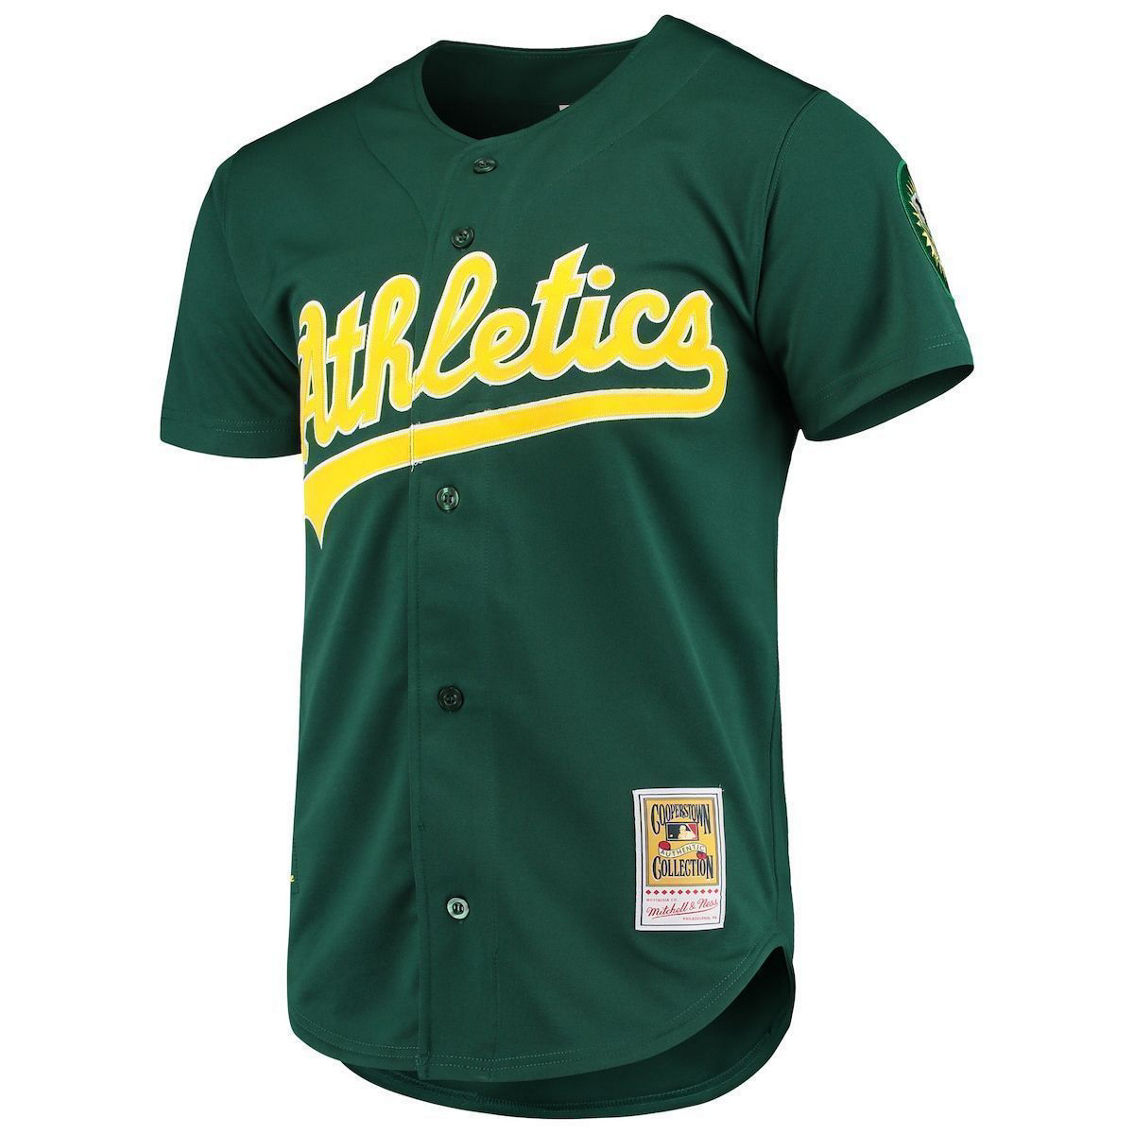 Mitchell & Ness Men's Mark McGwire Green Oakland Athletics 1997 Cooperstown Collection Authentic Jersey - Image 3 of 4